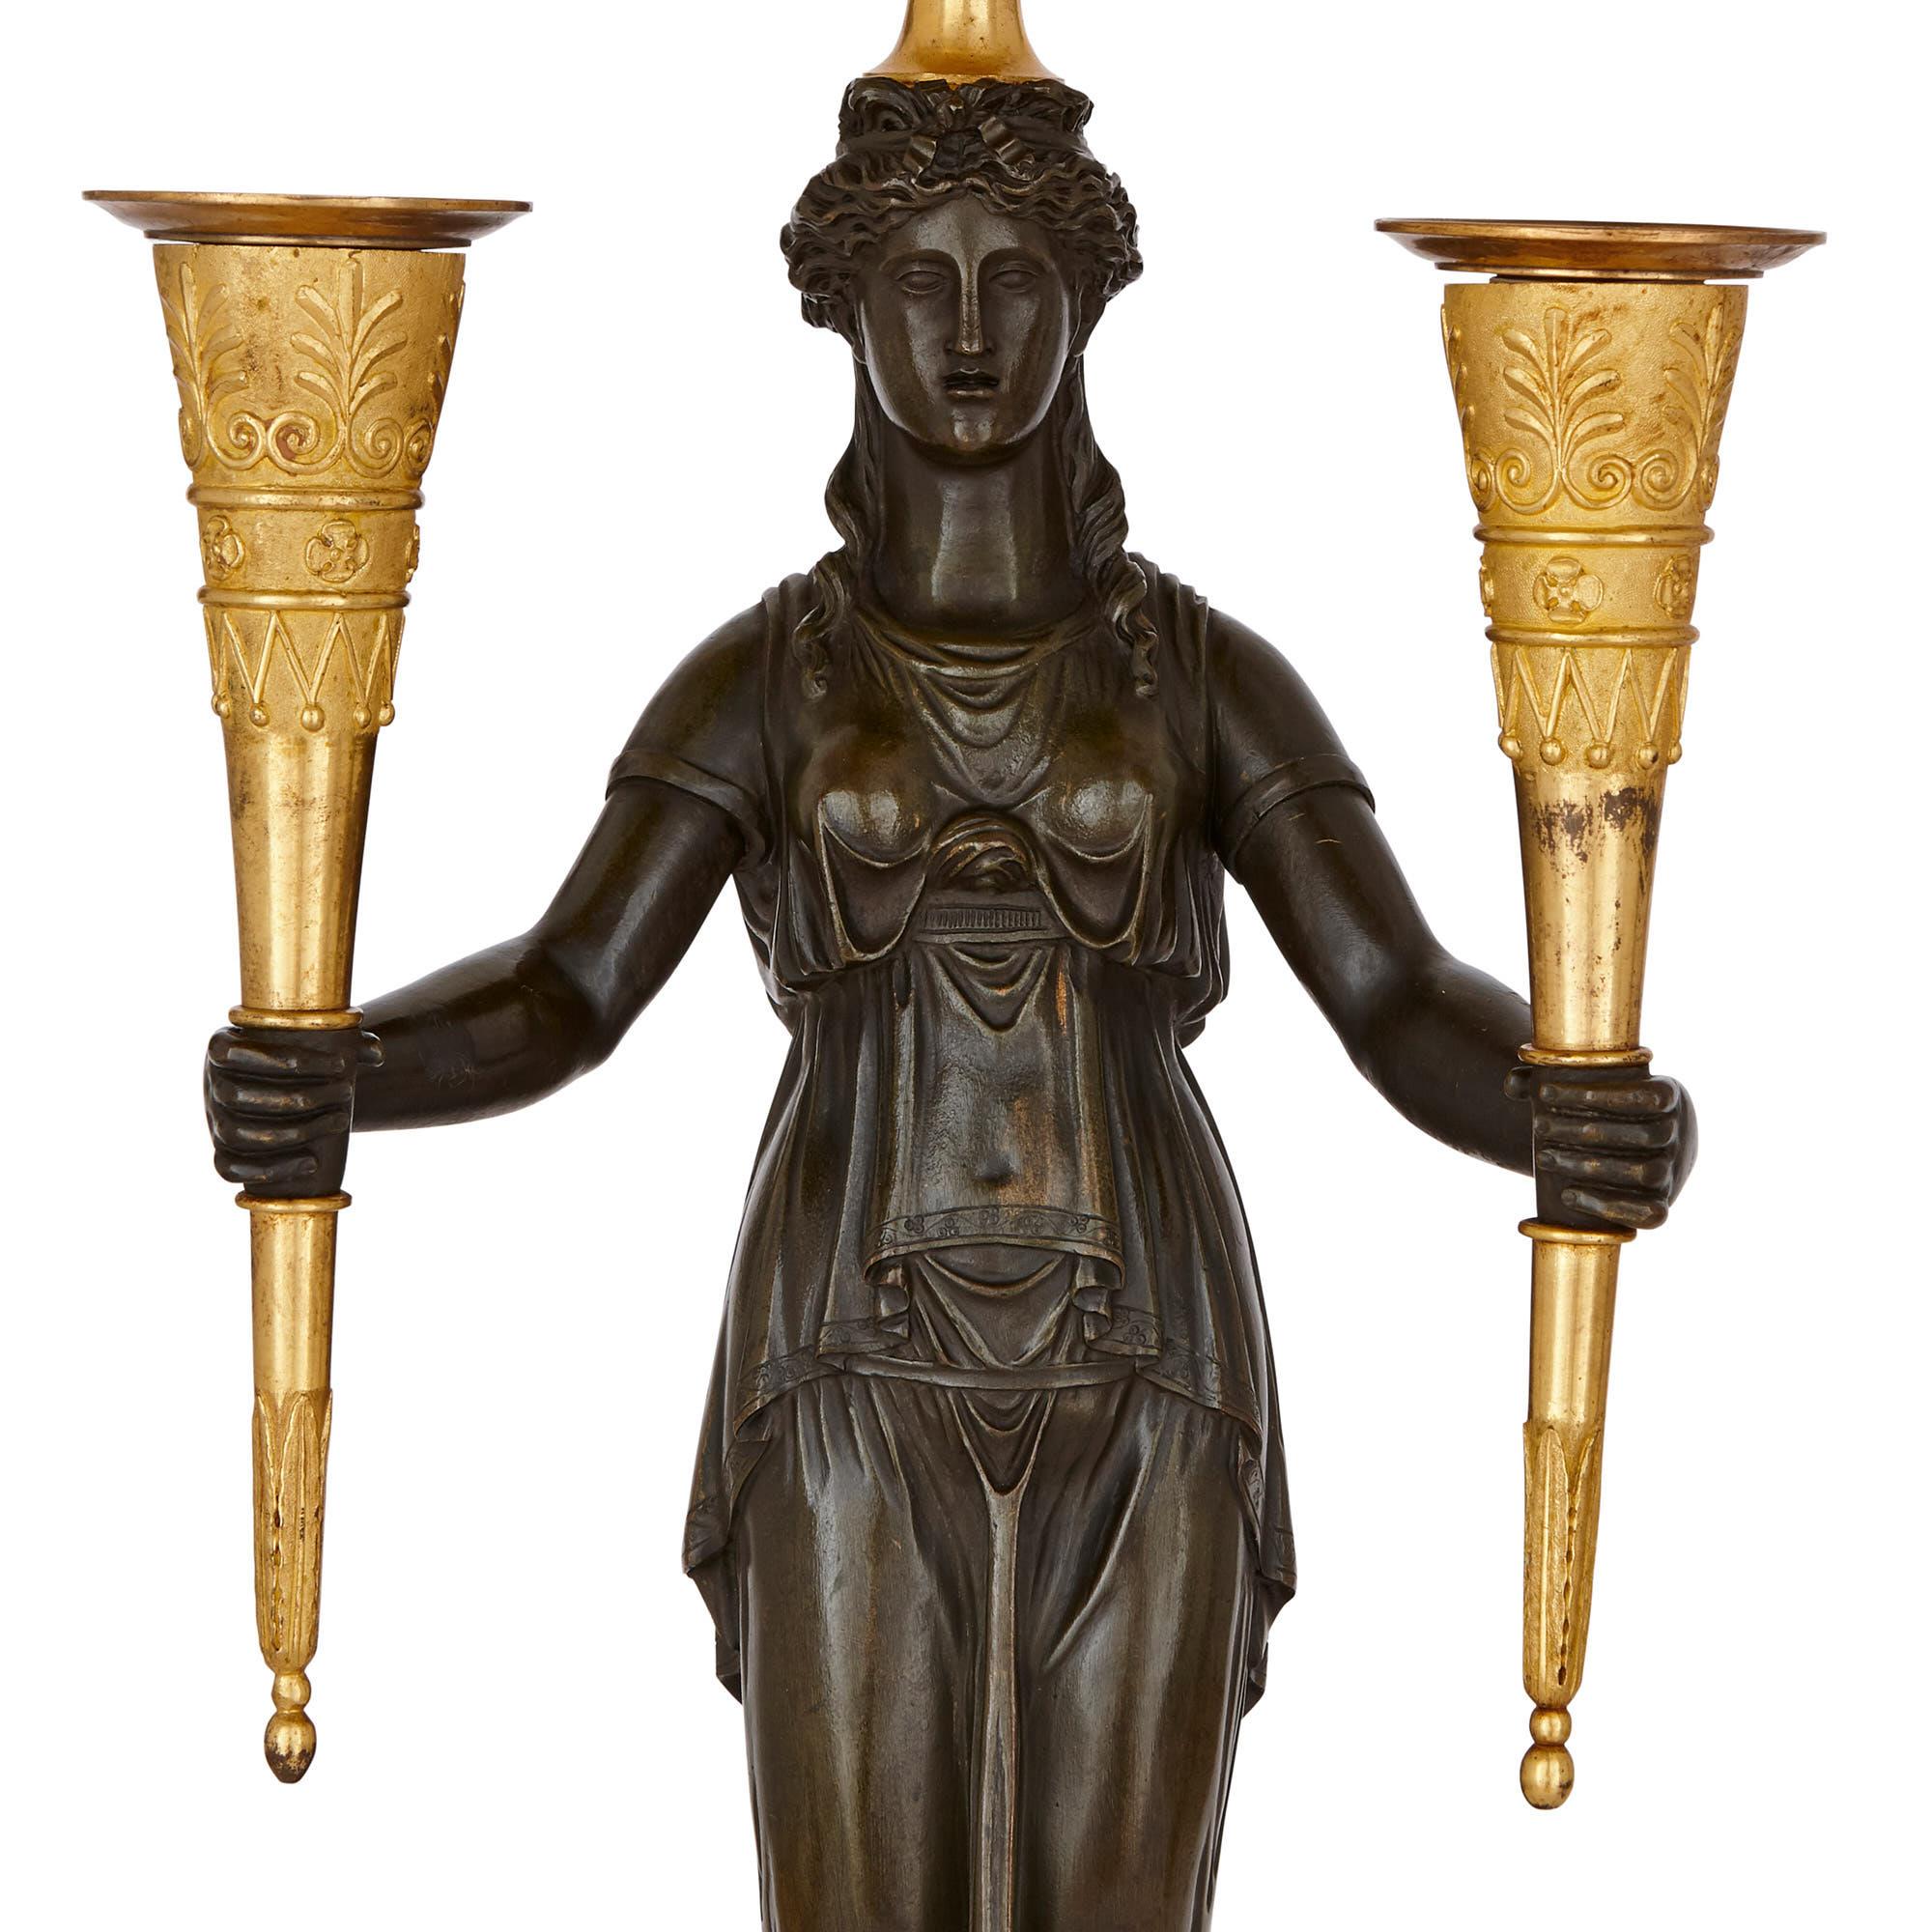 These bronze candelabra were created in France in circa 1810, when Napoleon Bonaparte was Emperor. The candelabra combine neoclassical and ancient Egyptian motifs, in a manner characteristic of Empire period decorative art. 

The candelabra have